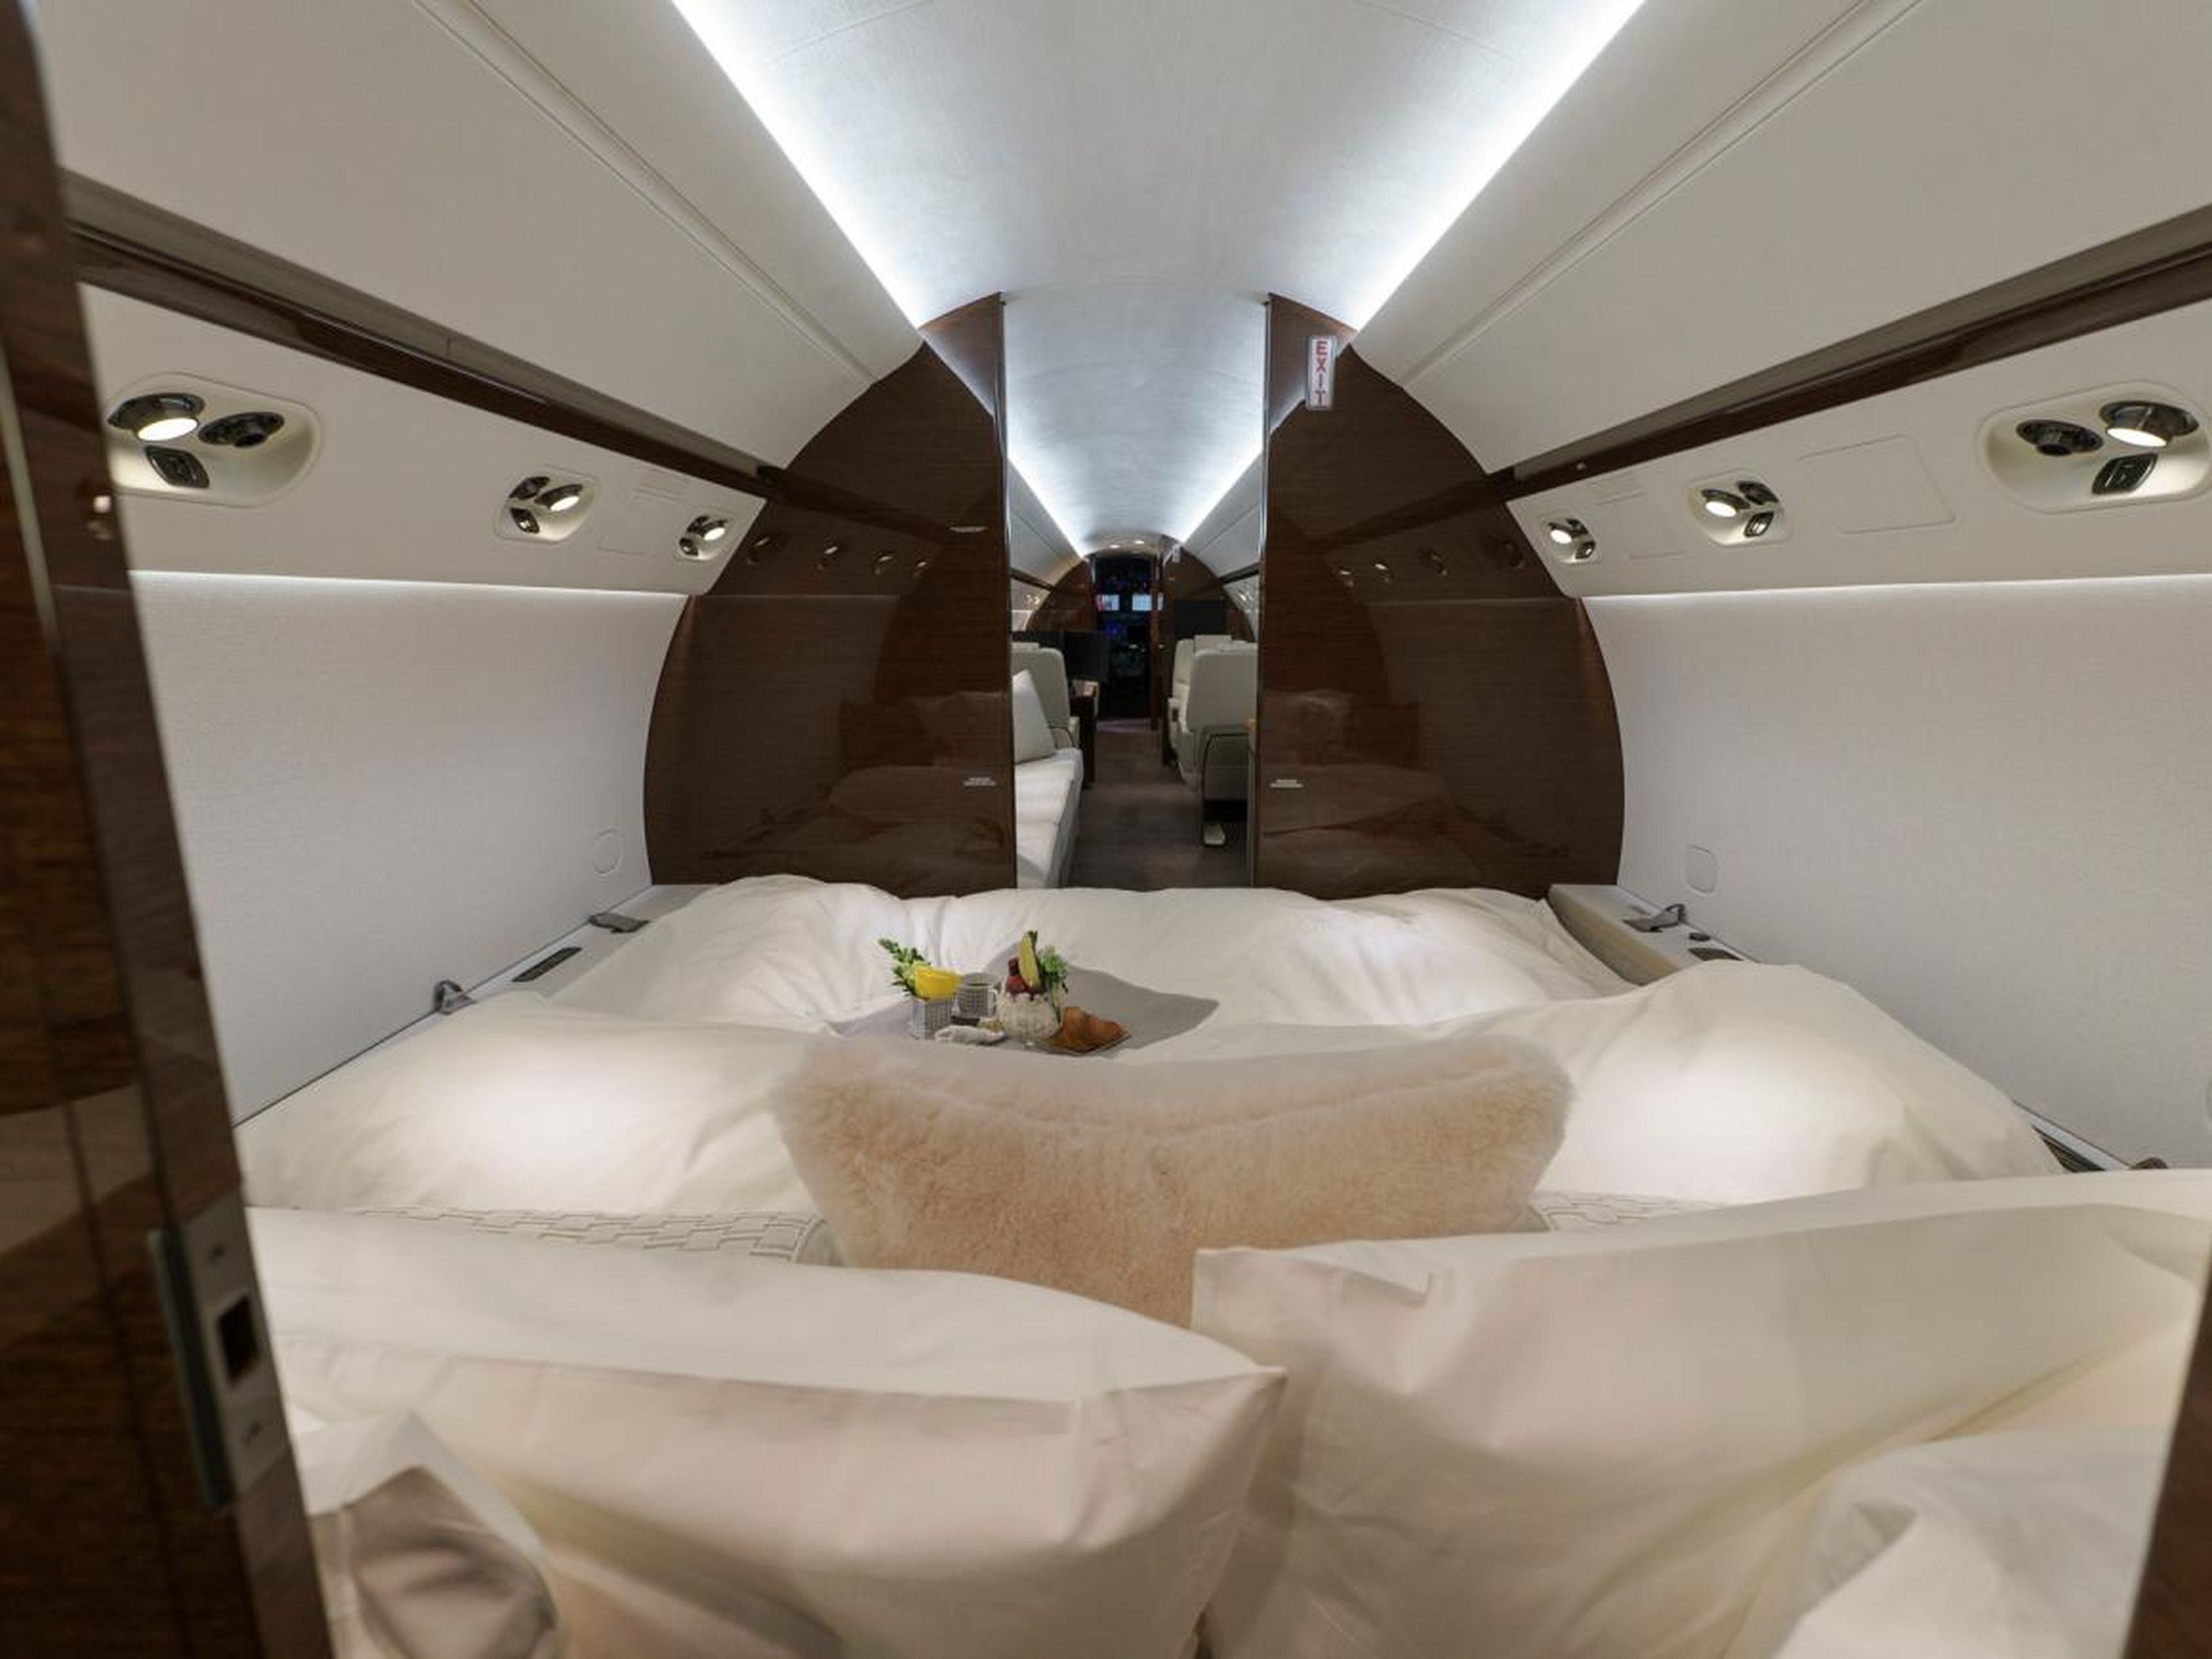 A bedroom in a Gulfstream G550.